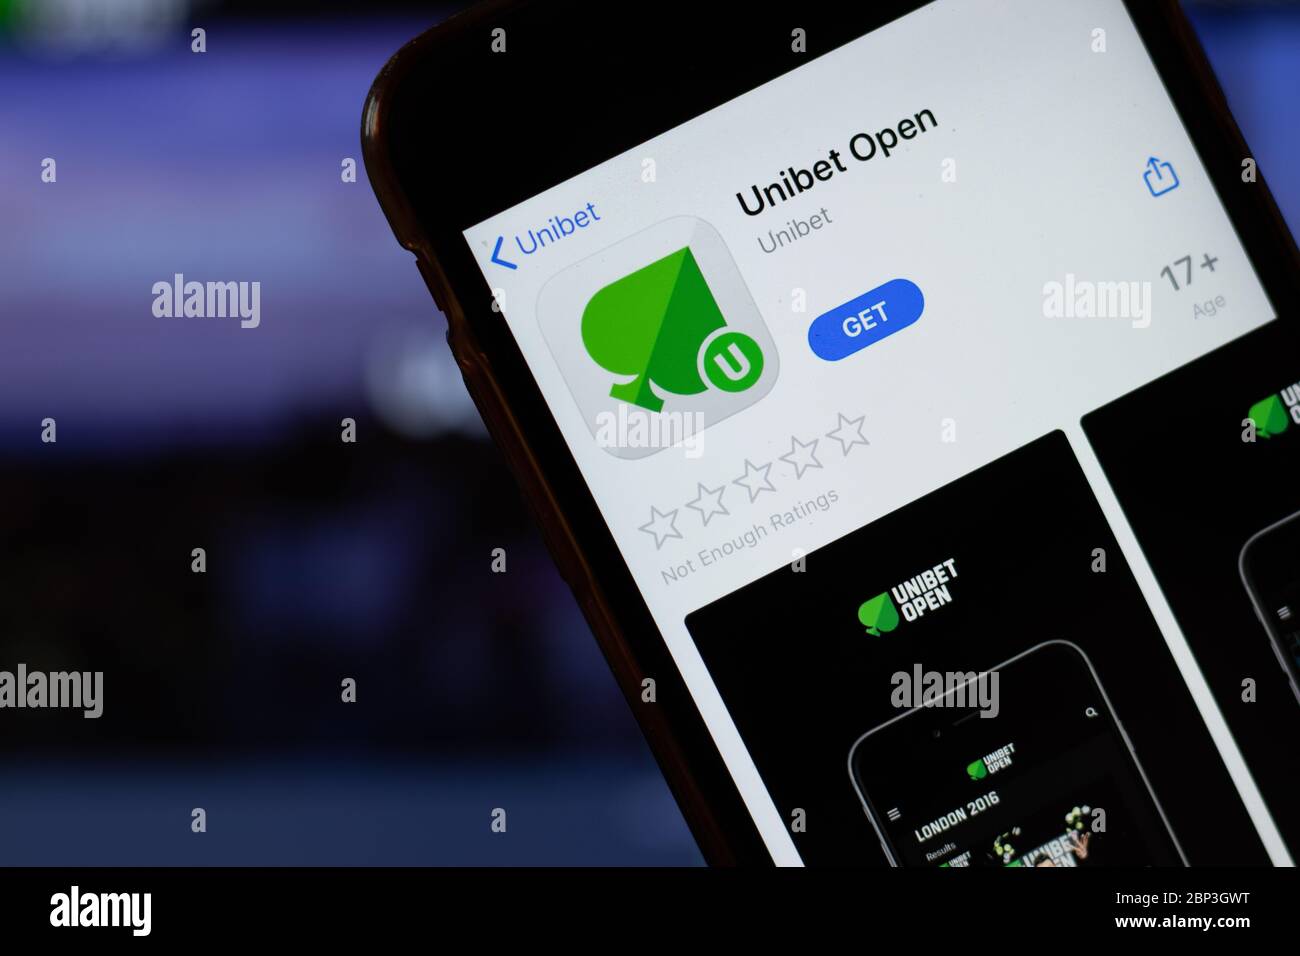 New York, USA - 15 May 2020: Unibet Open mobile app logo on phone screen,  close-up icon, Illustrative Editorial Stock Photo - Alamy